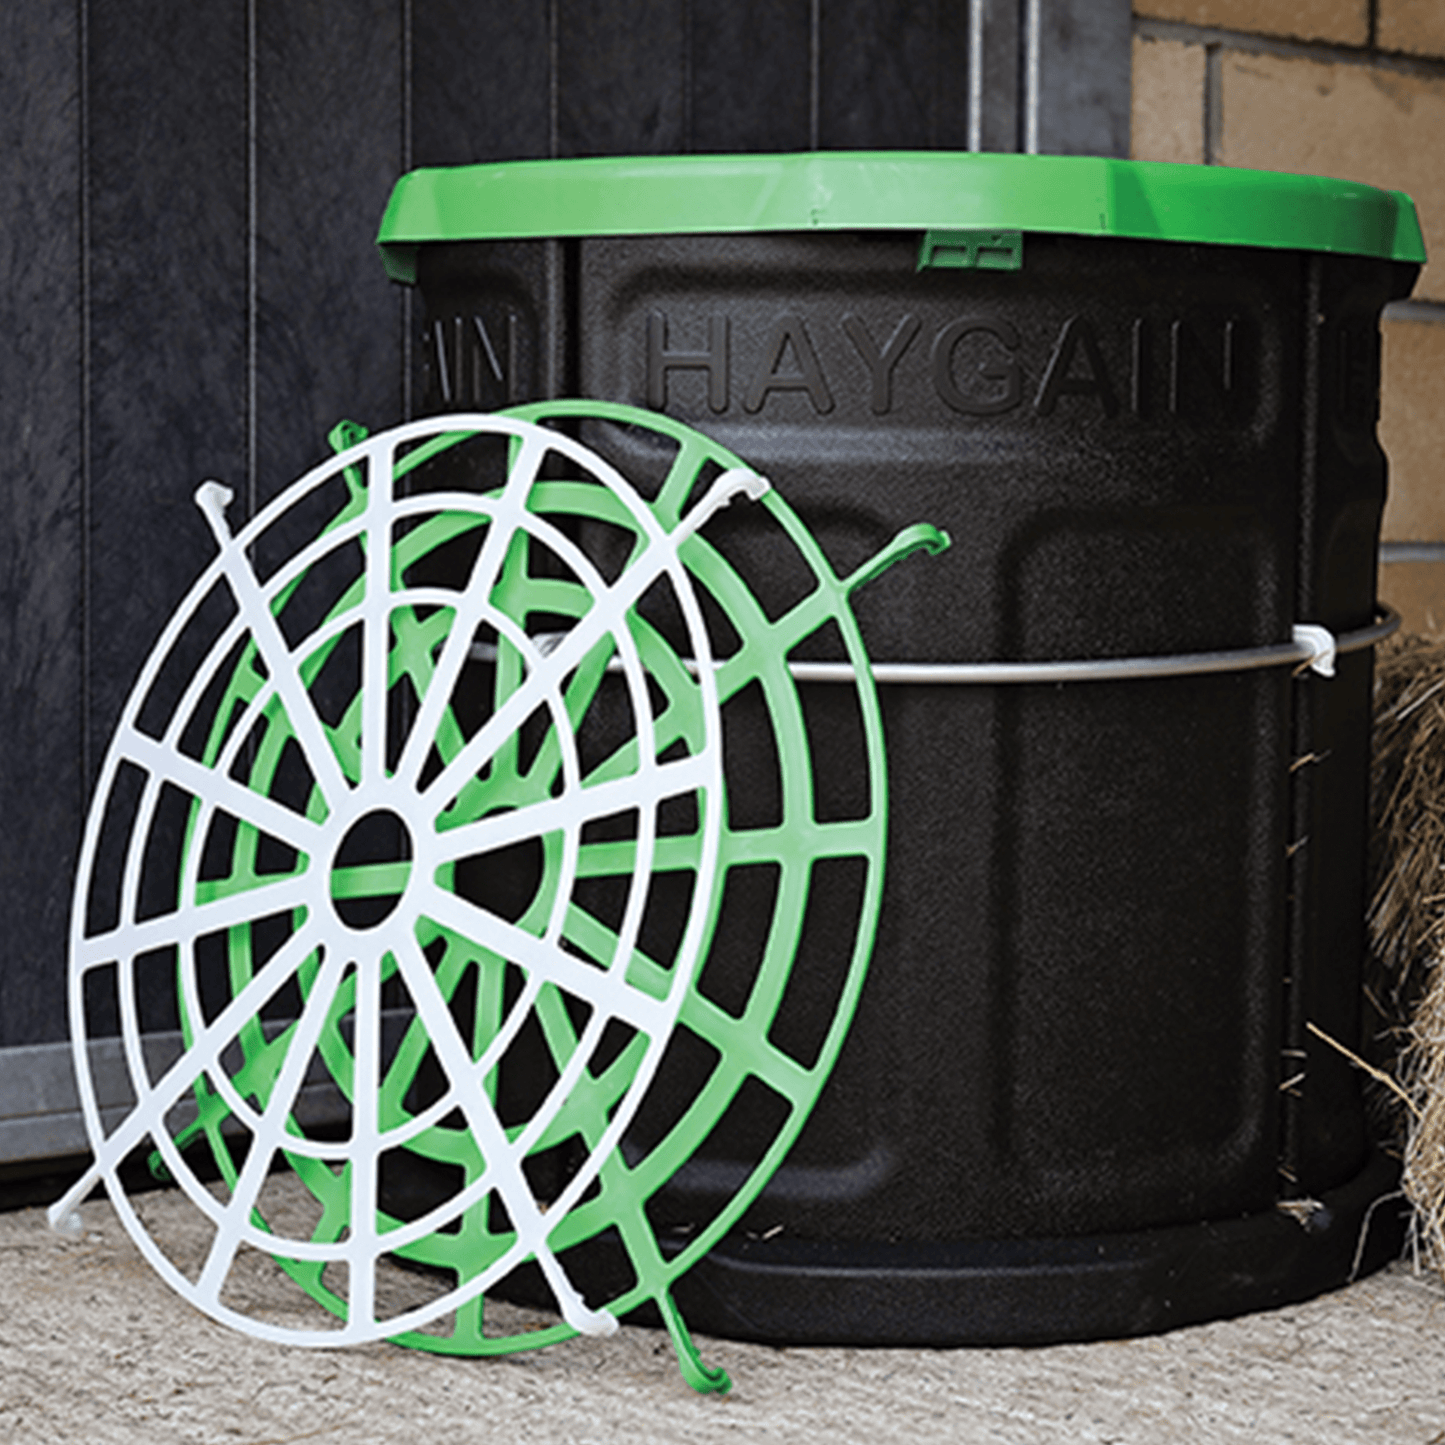 The Haygain Forager Slow Feeder